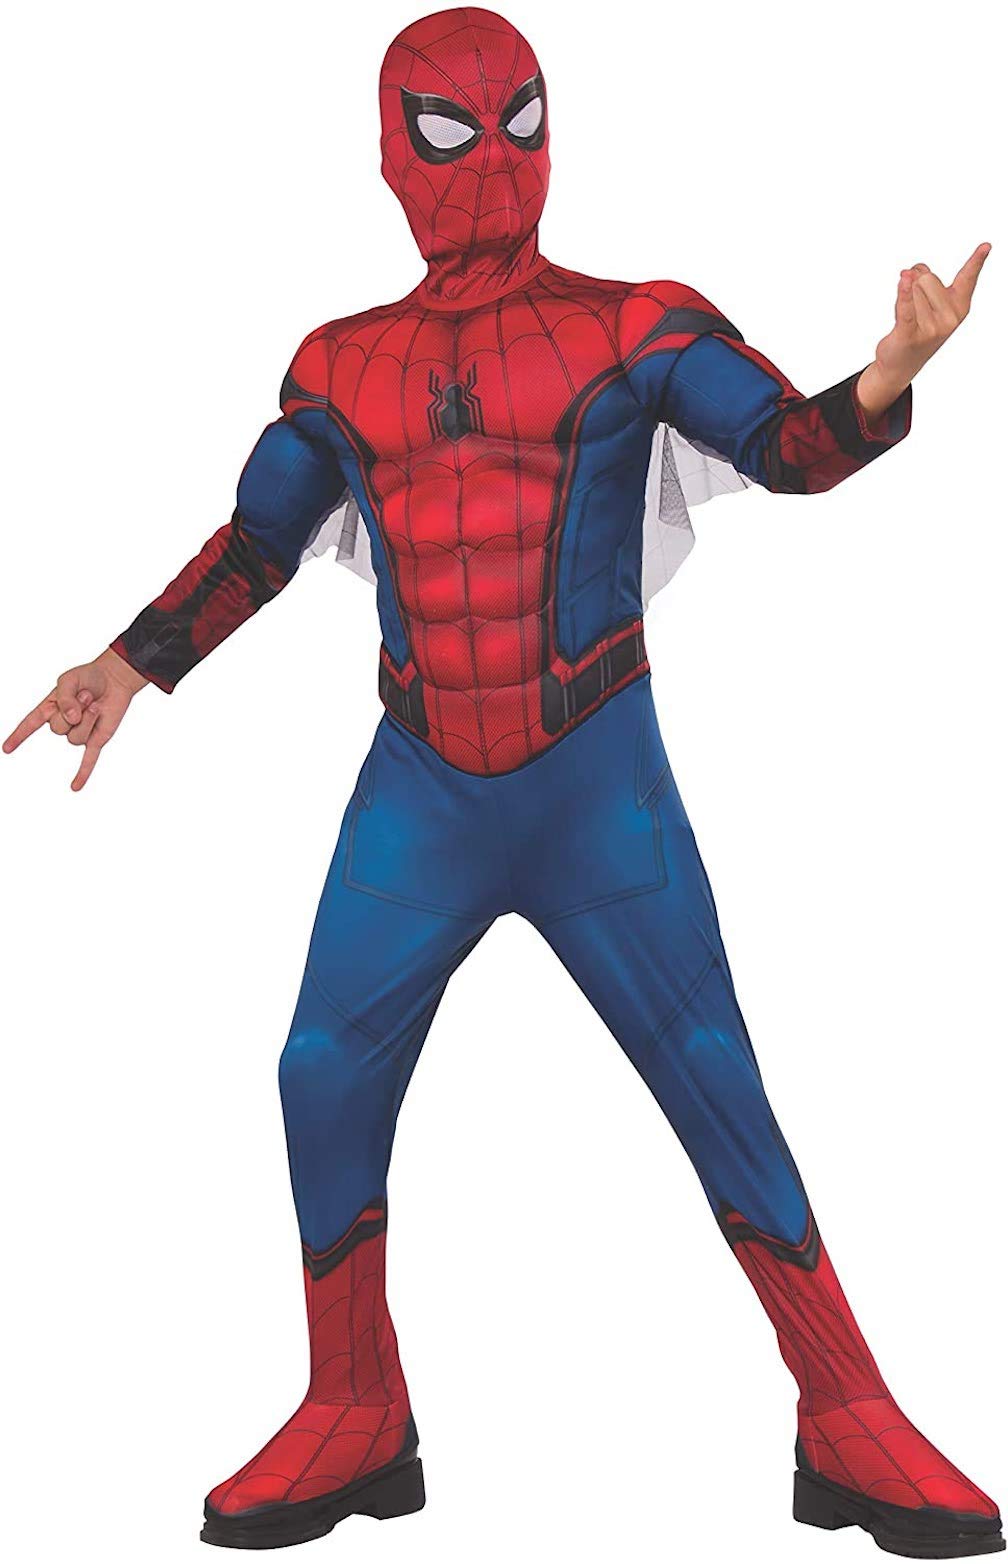 Rubie's Child's Marvel Spider-Man Far from Home Deluxe Spider-Man Costume & Mask, Medium,Red/Blue